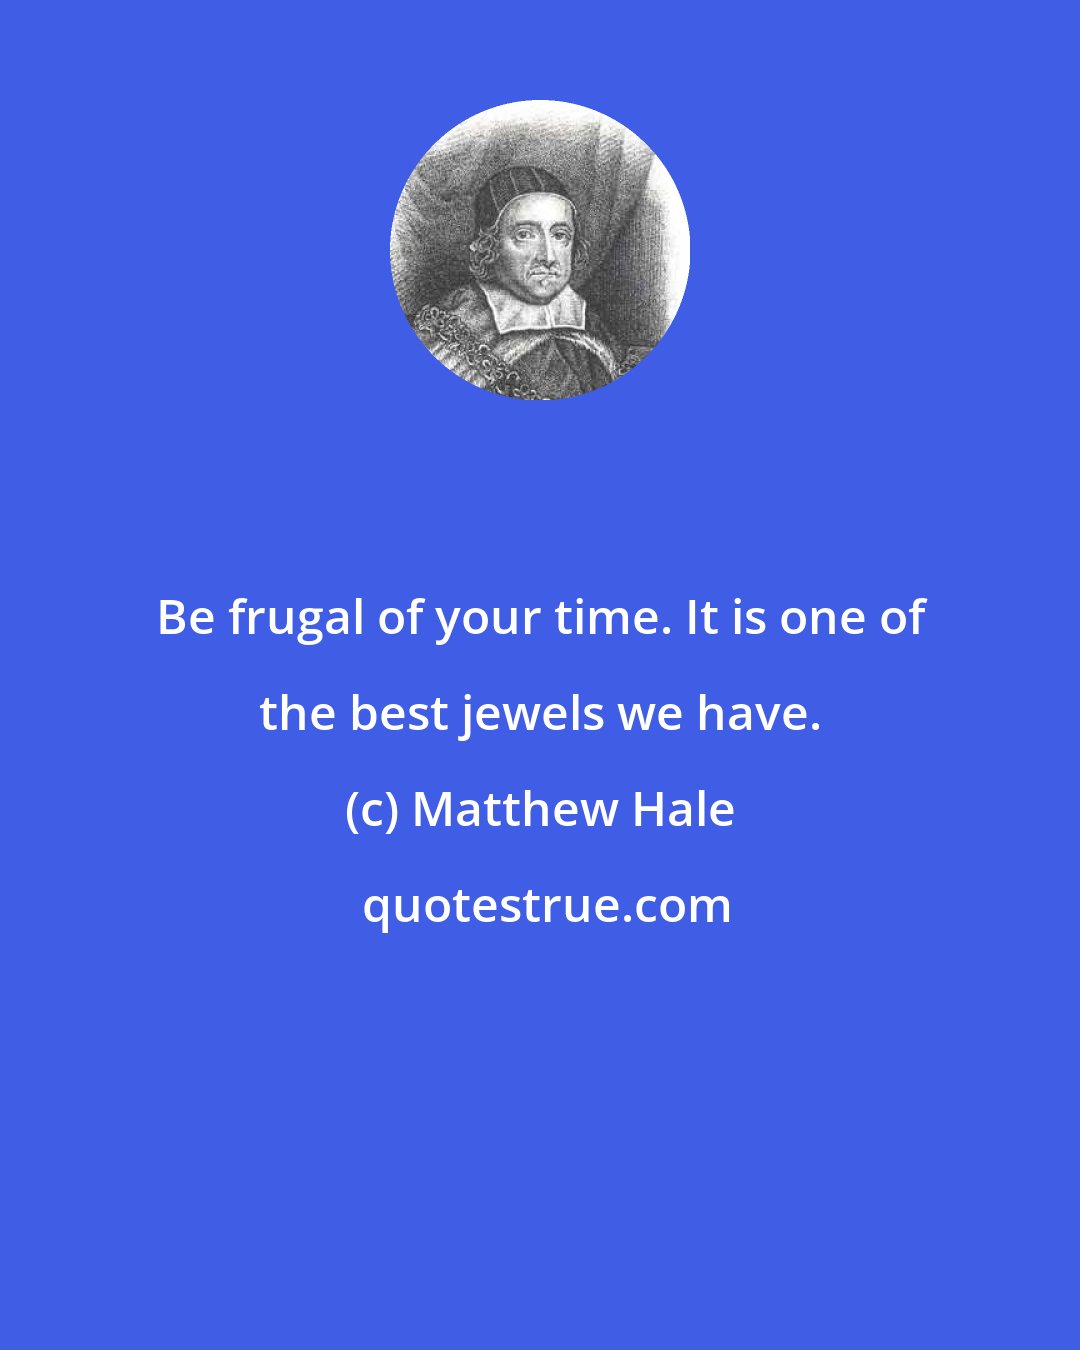 Matthew Hale: Be frugal of your time. It is one of the best jewels we have.